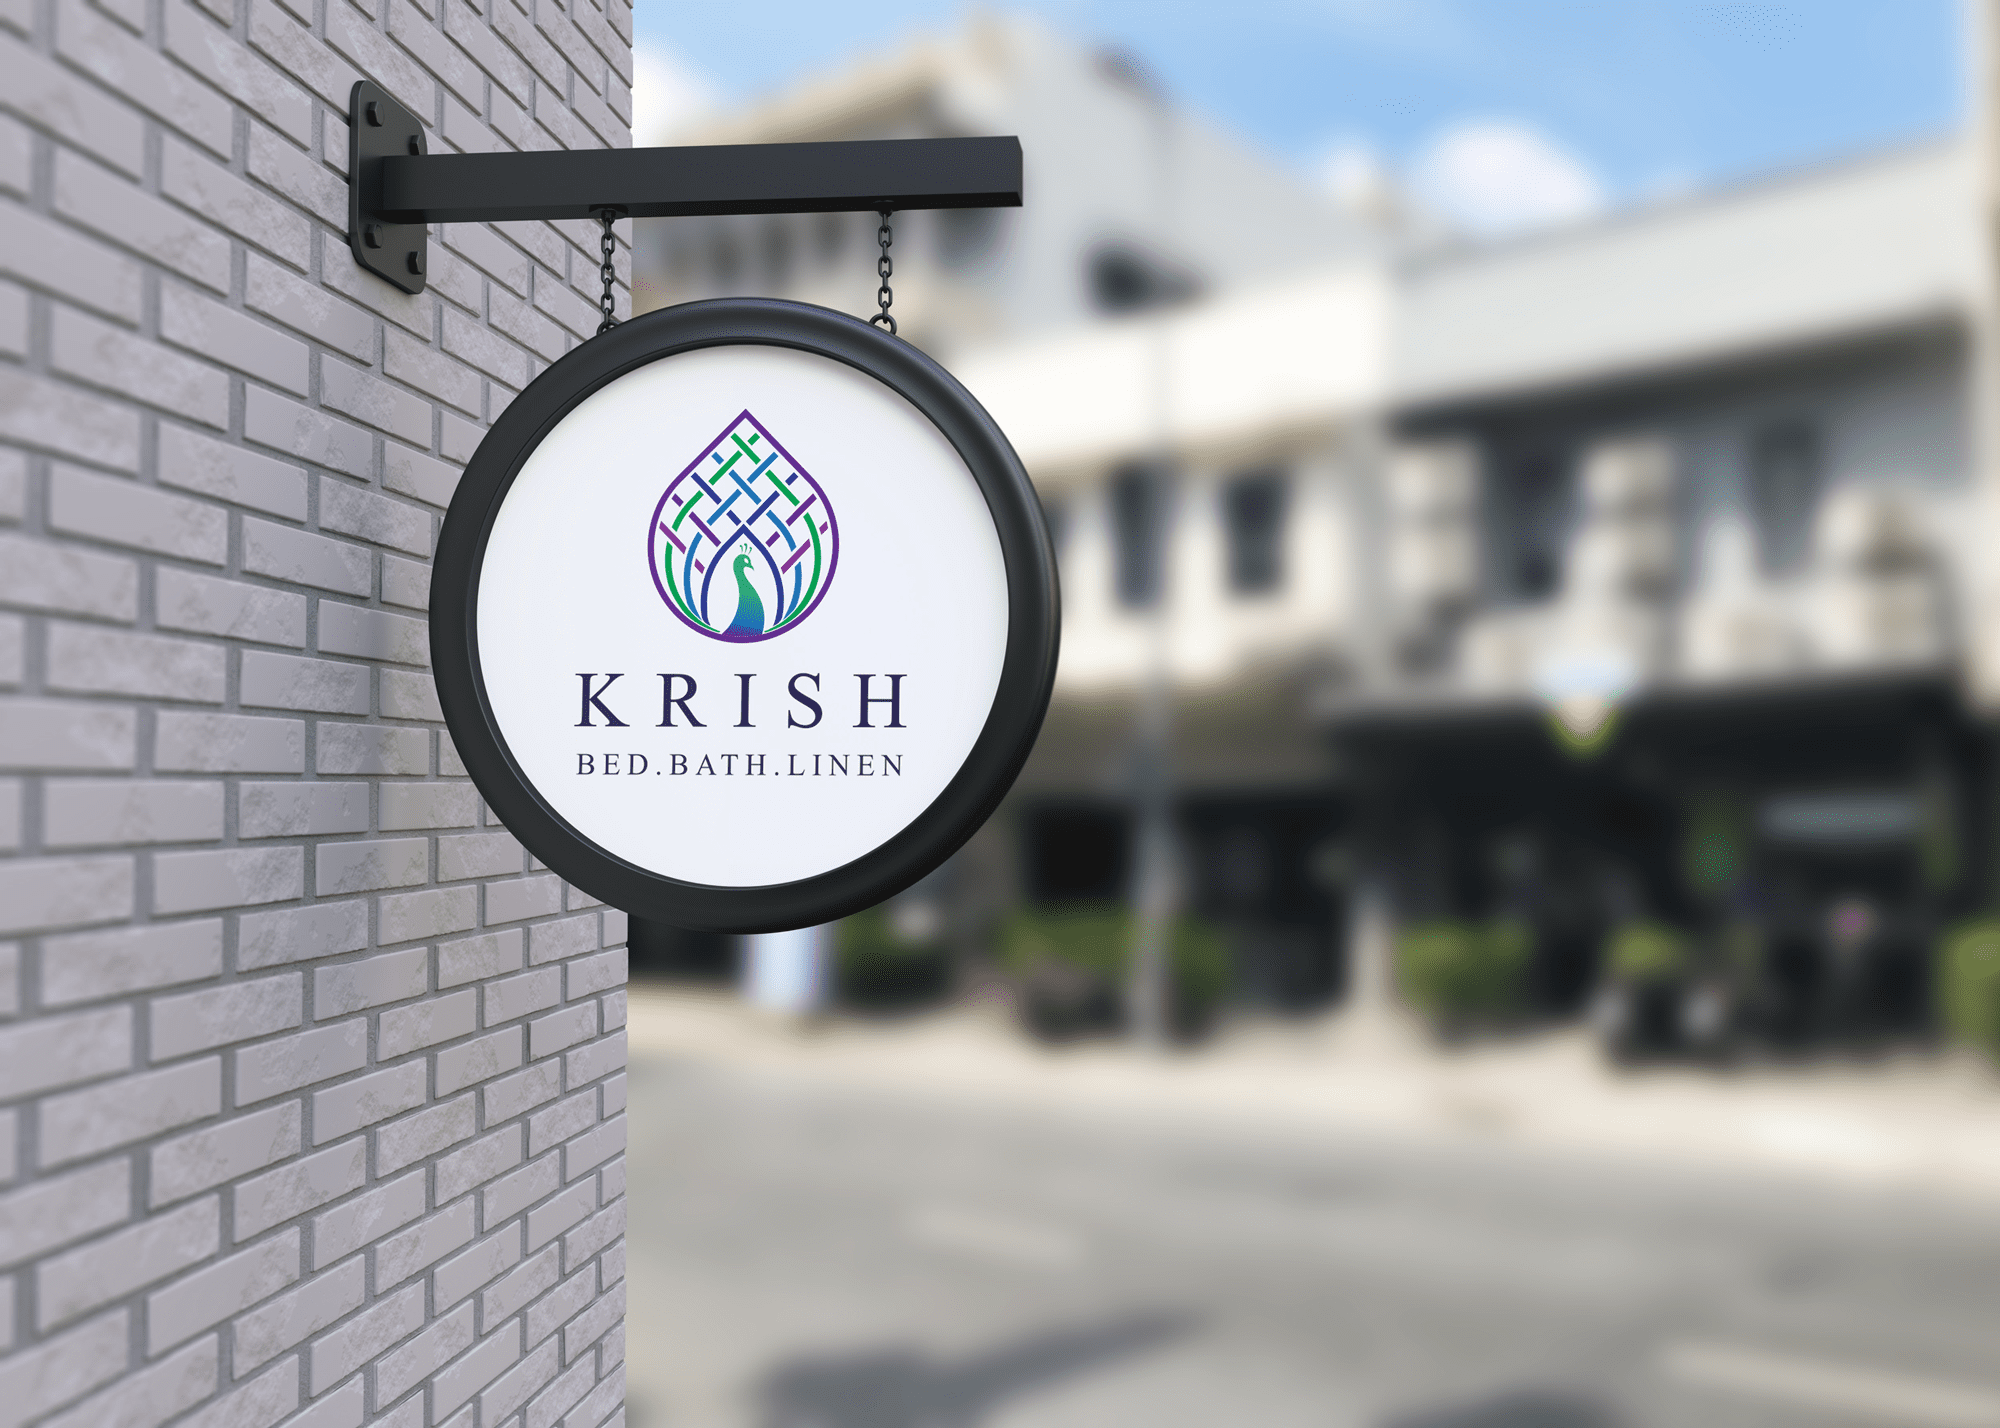 Krish Office Board Graphic Design, Branding Packaging Design in Singapore by Creative Prints thecreativeprints